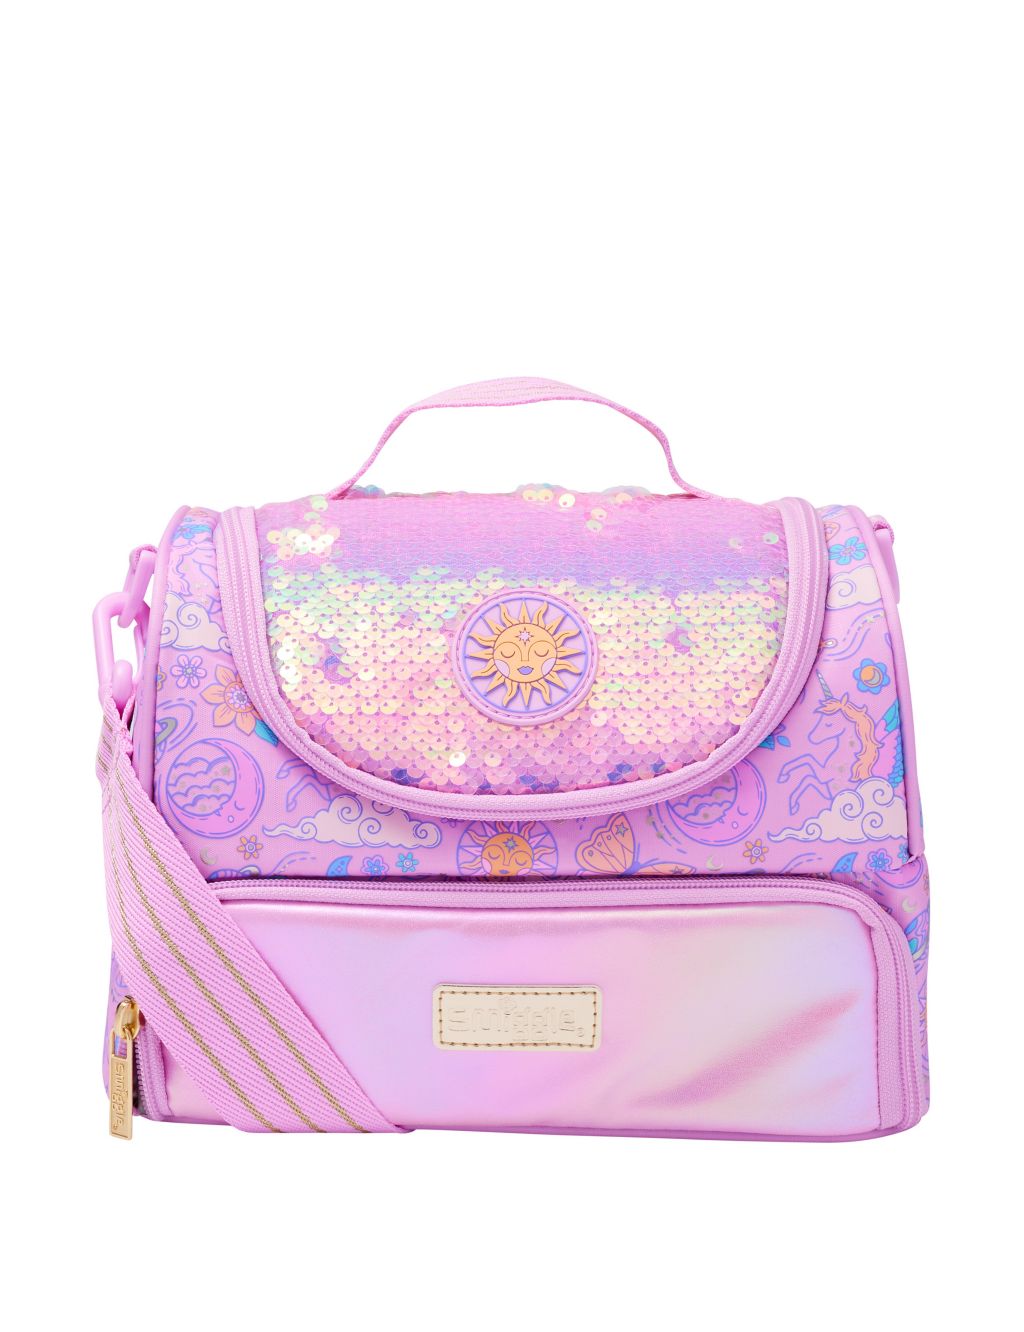 Kids' Cosmos Sequin Lunch Box